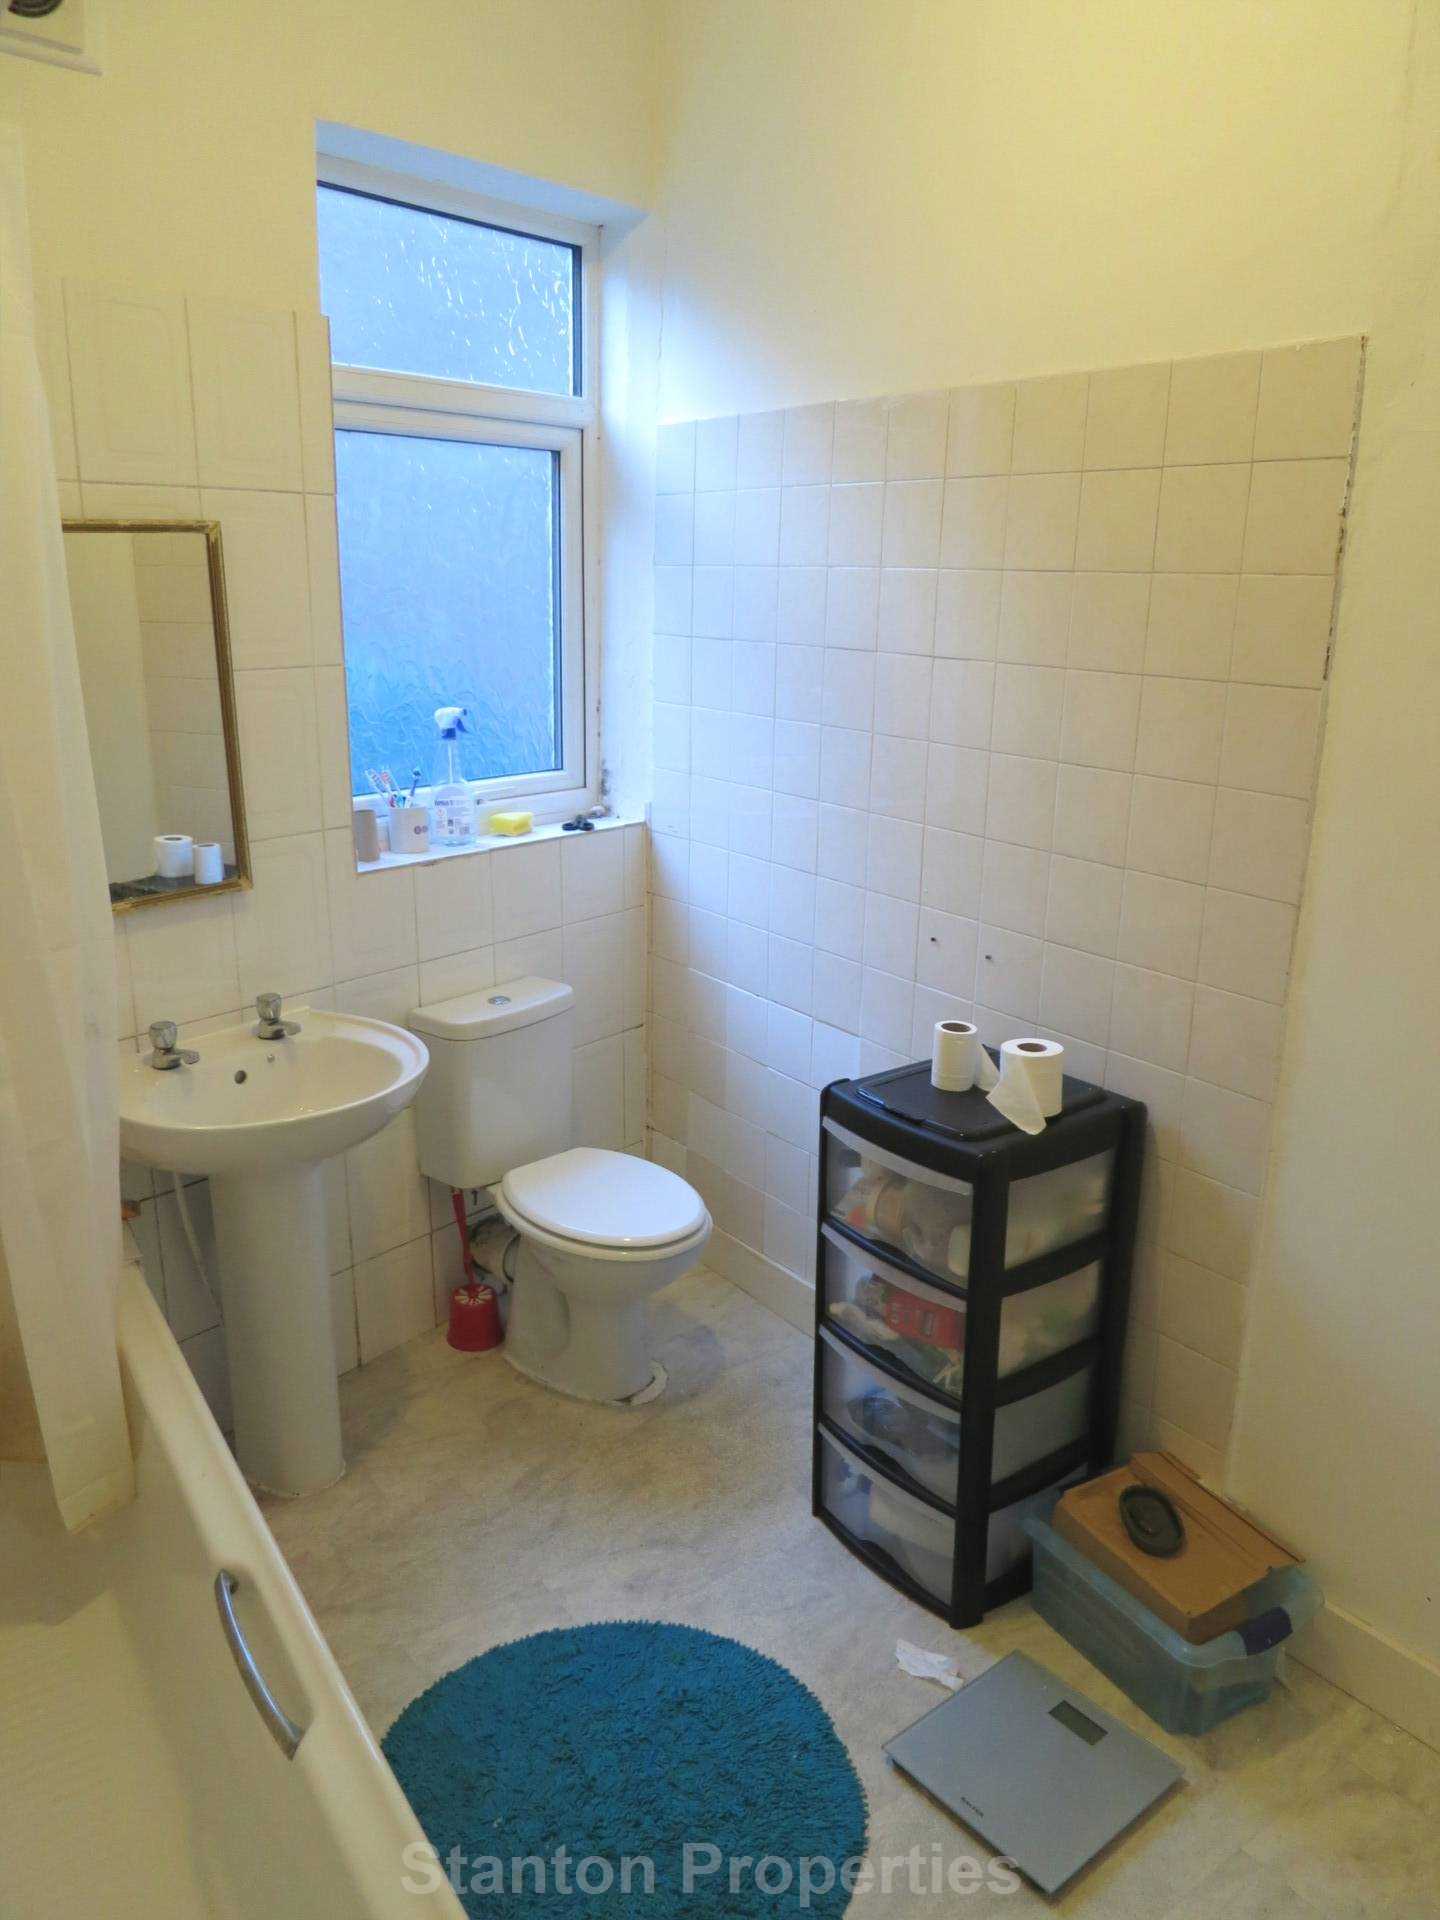 £115 pppw, See Video Tour, Wellington Road, Withington, Image 19